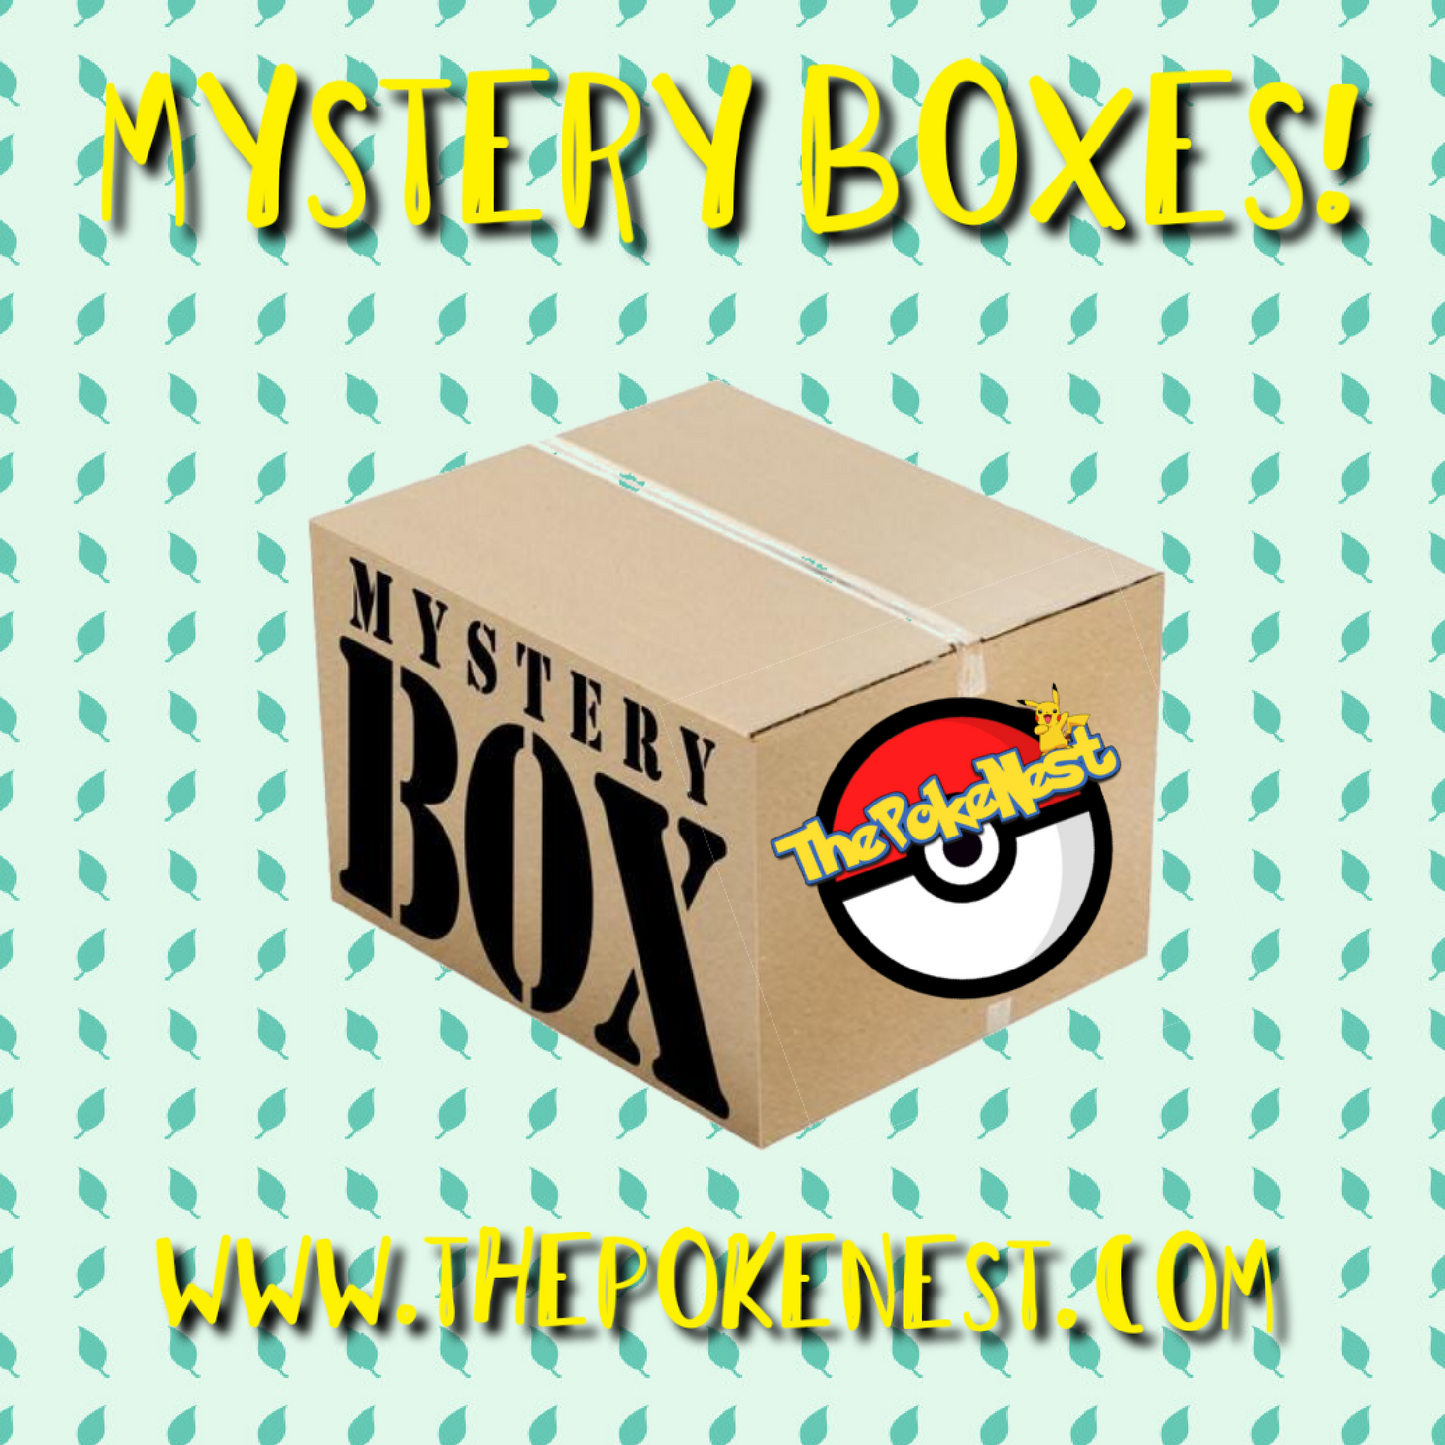 ThePokeNest Mystery Boxes